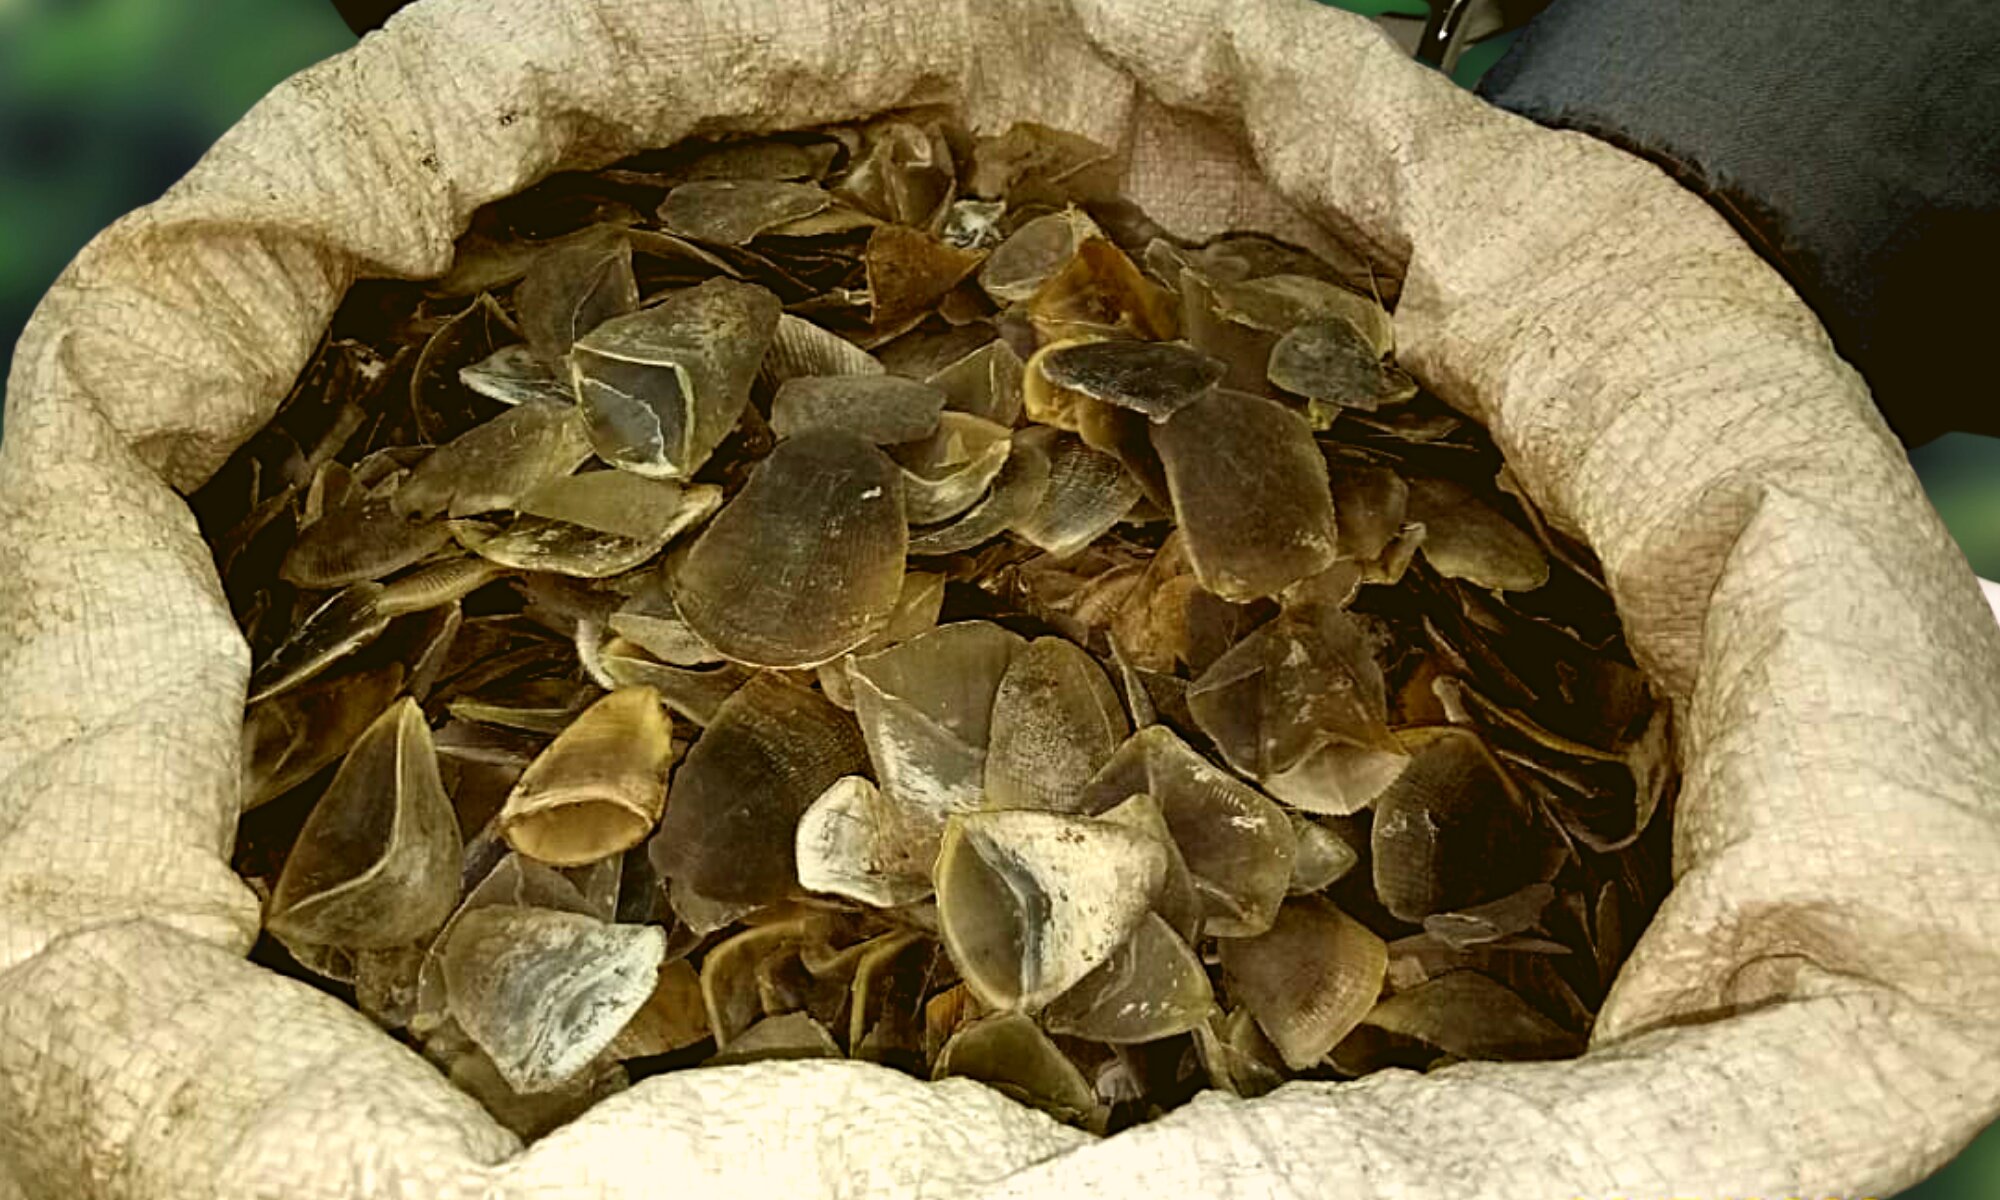 Scales of critically endangered pangolin seized in Sumatra